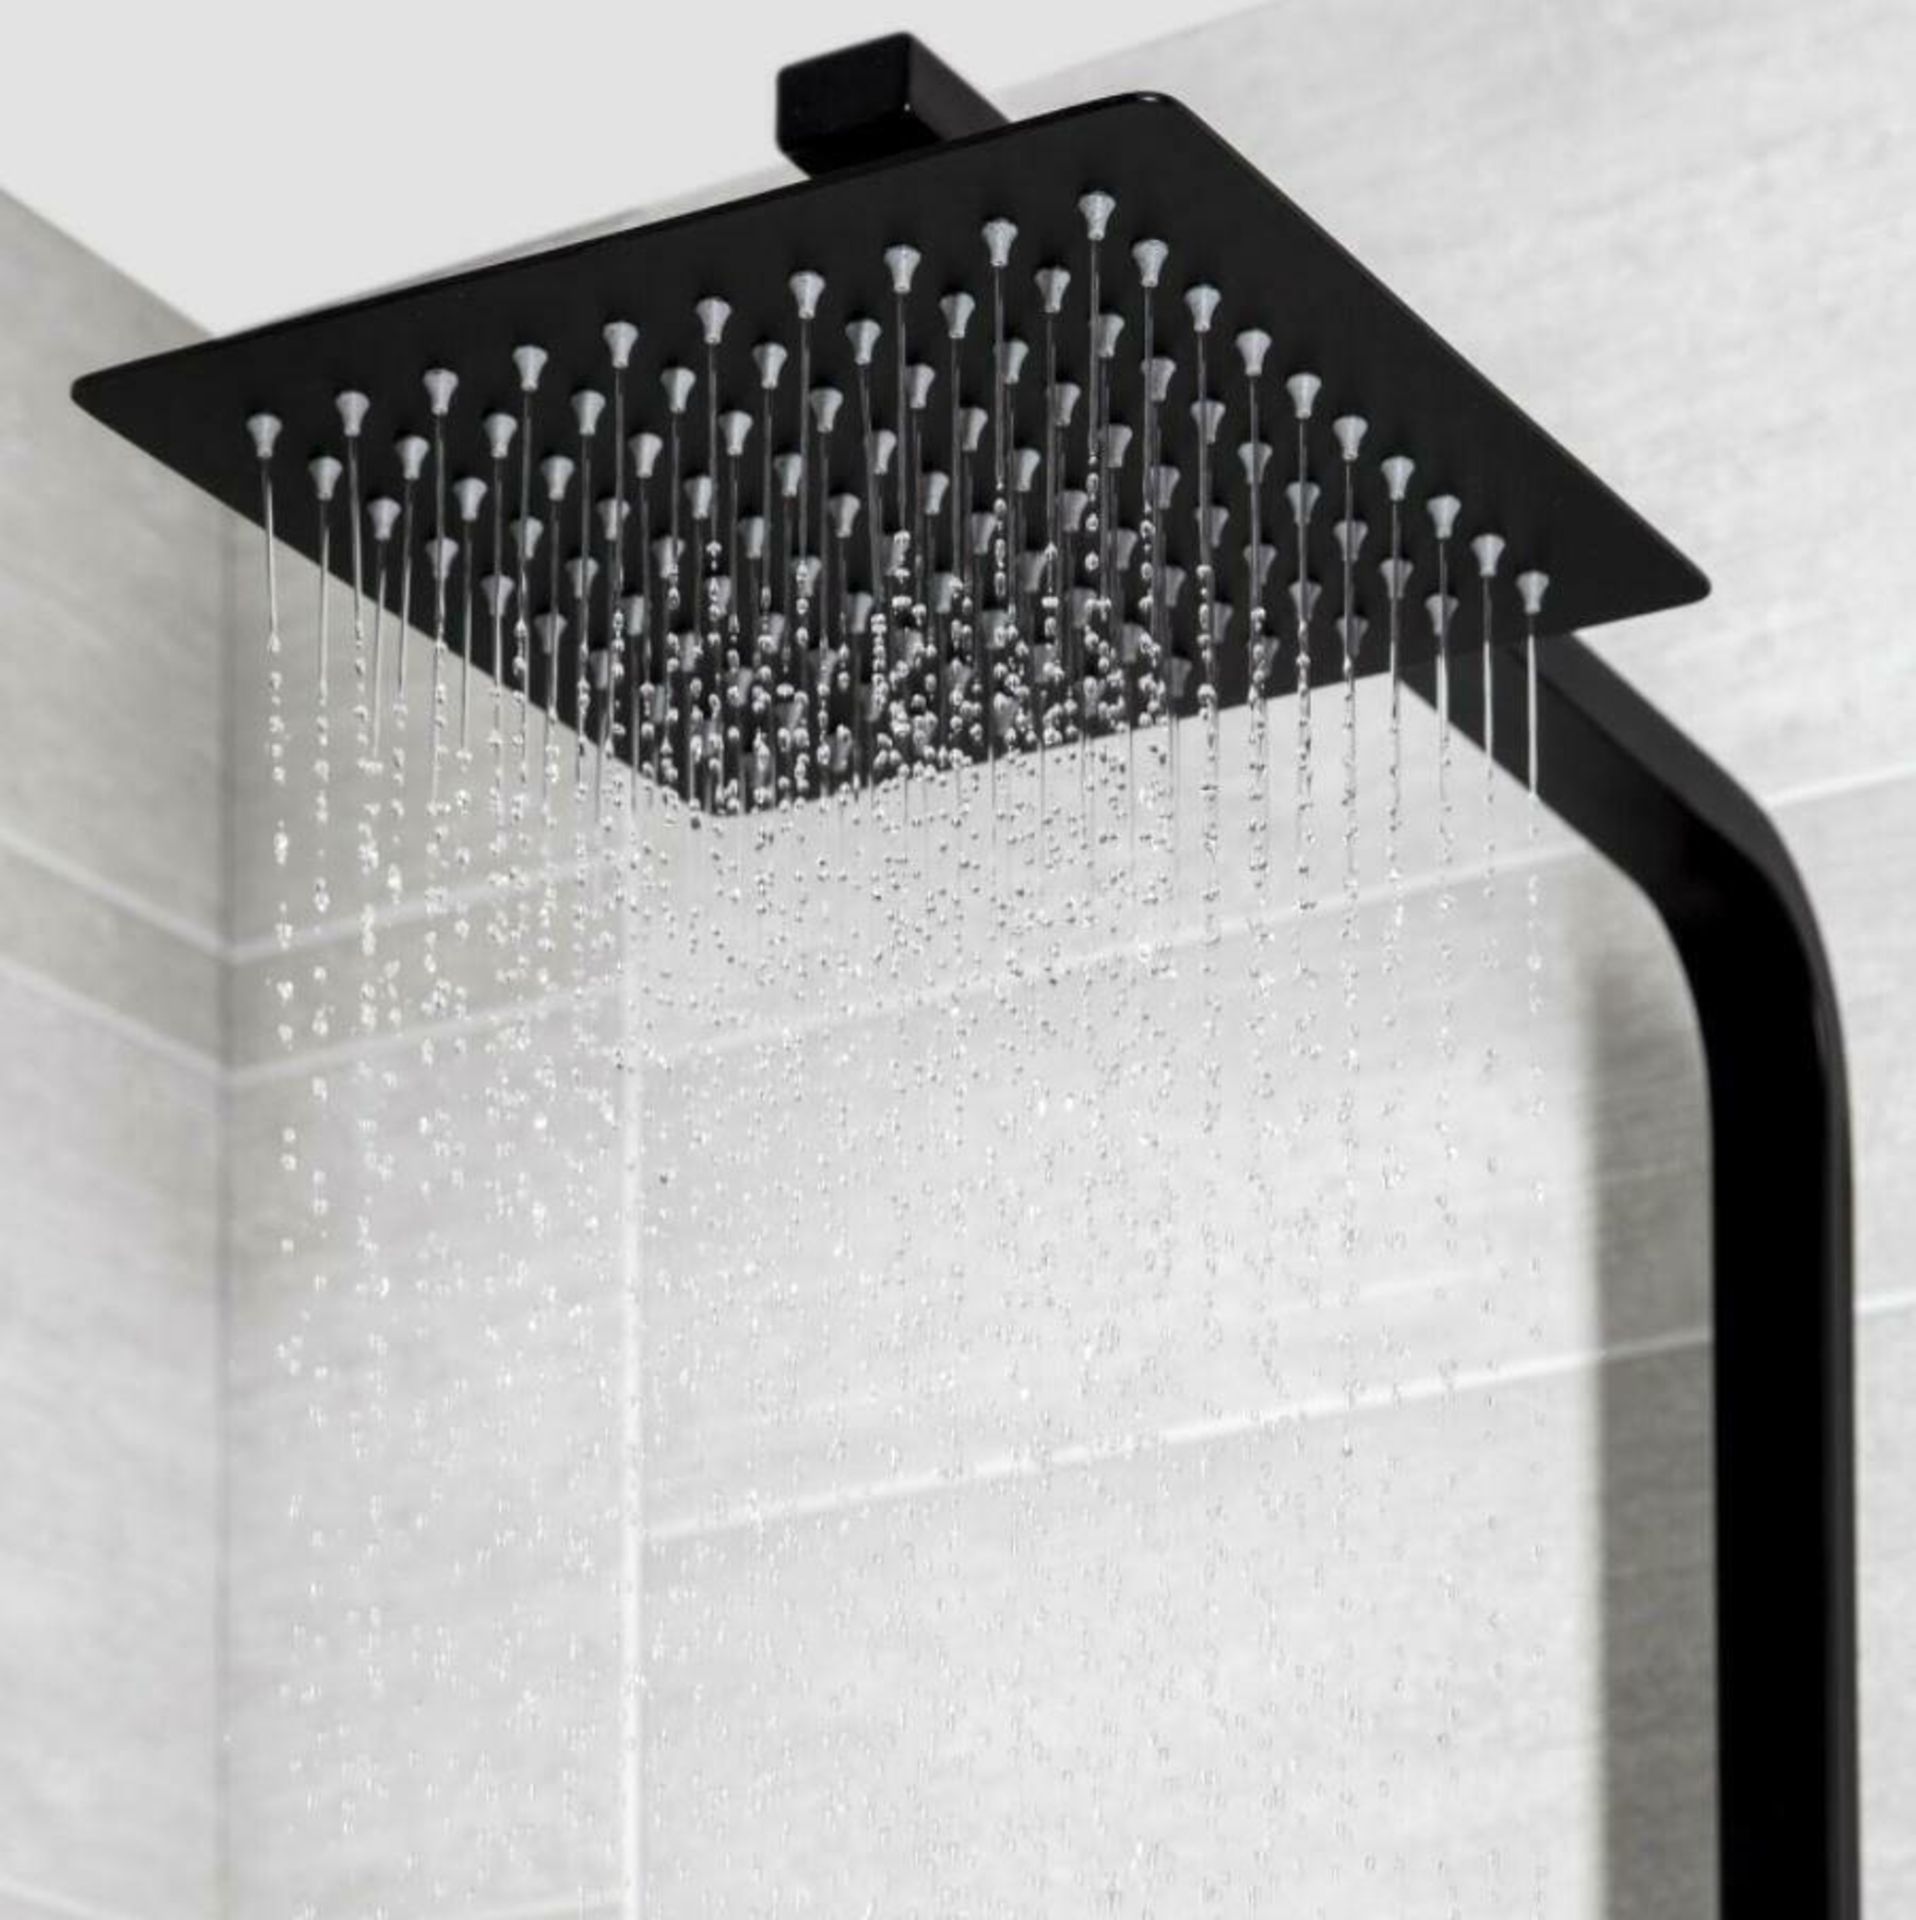 1 x Trisen Zacha Black Thermostatic Shower Kit With Valve, Riser, Shower Head and Handset - RRP £289 - Image 4 of 8